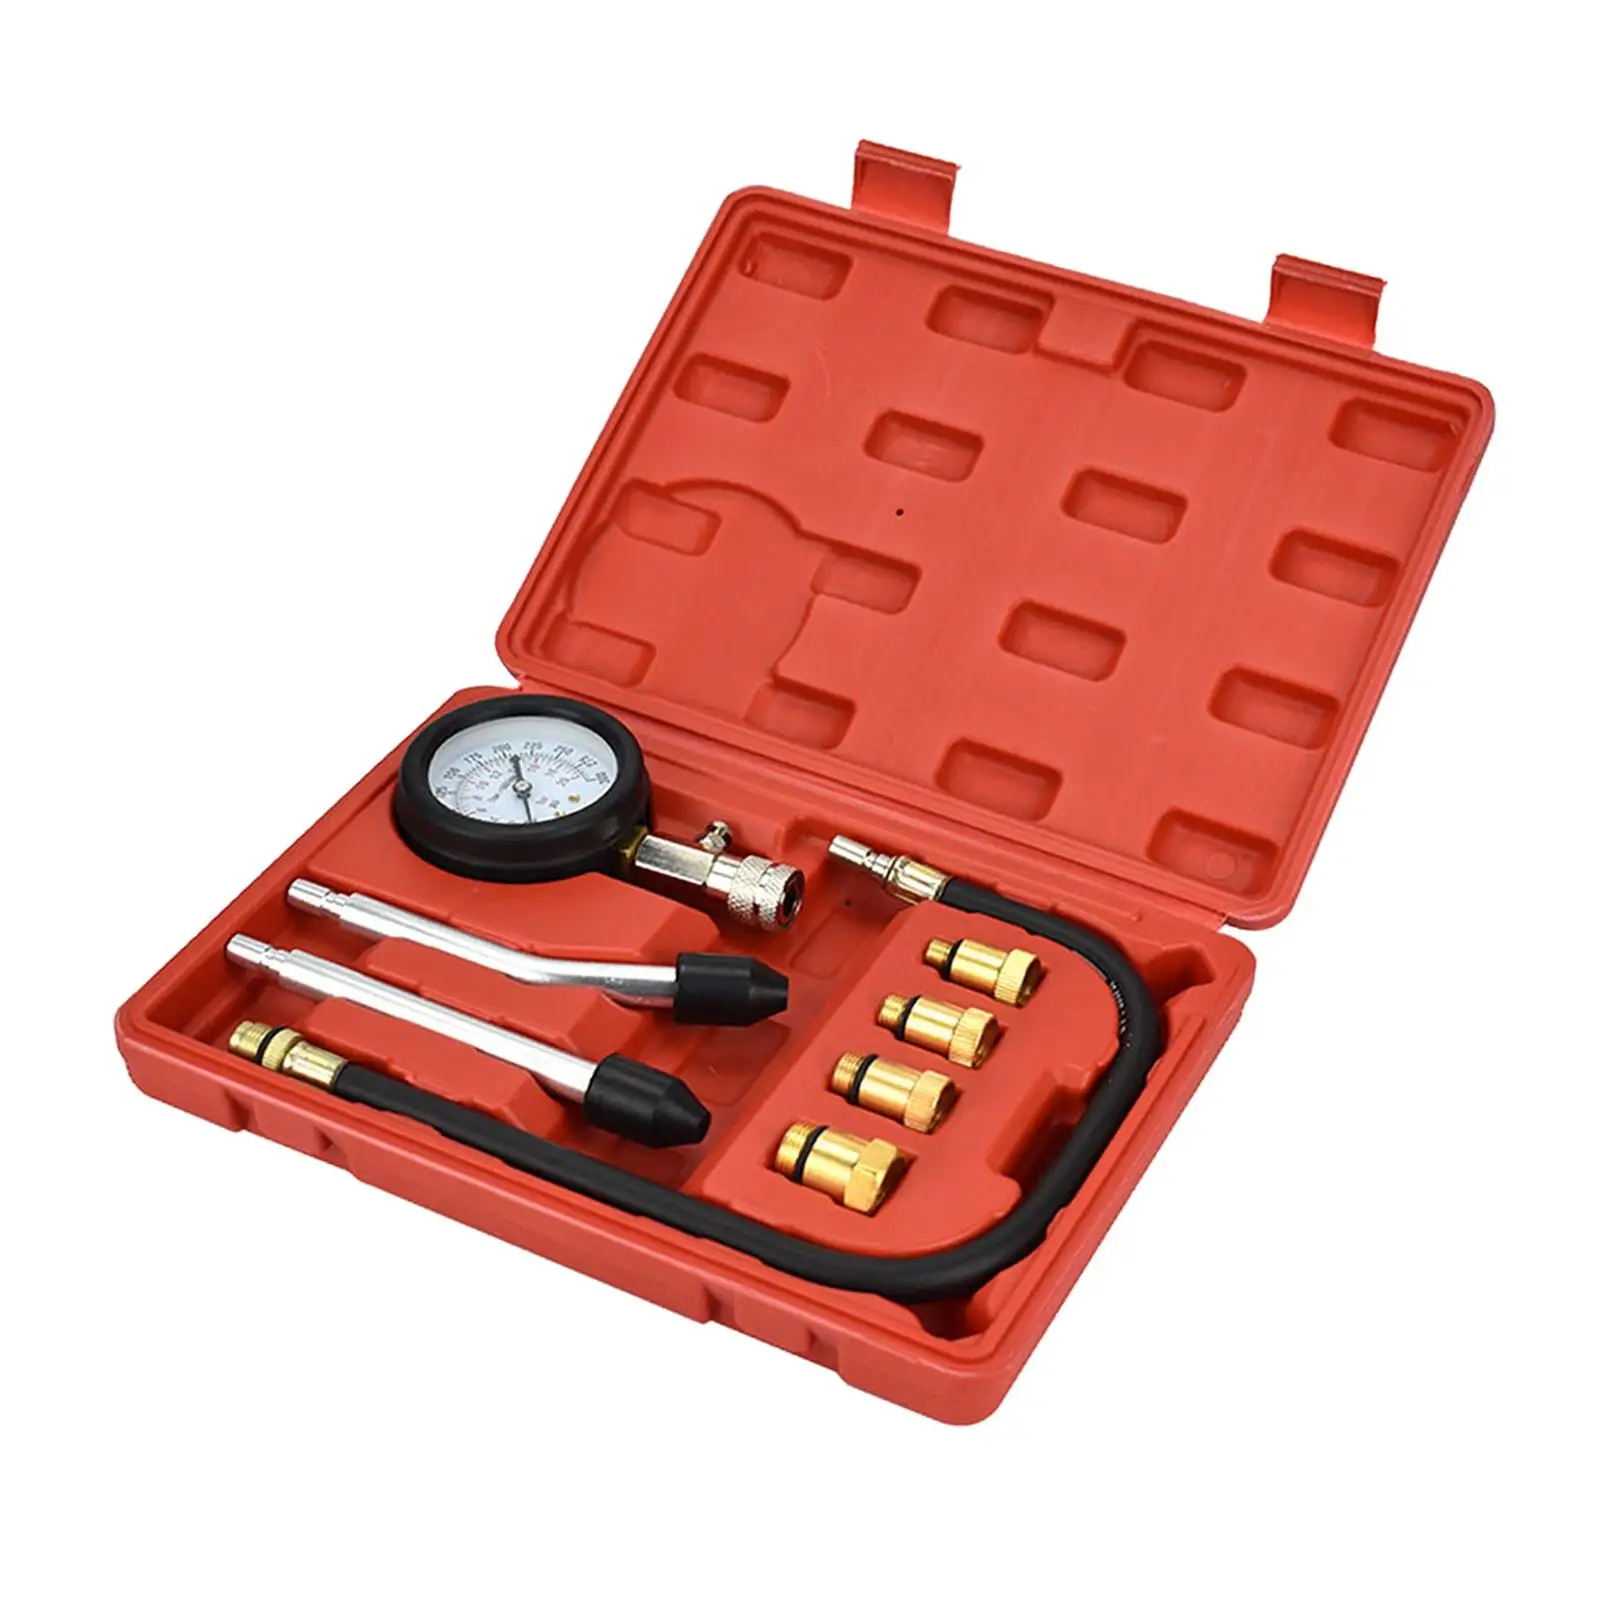 Set of 8 Petrol Engine Cylinder Compression Tester Tool with Case Easy Carrying and Storing High Precision Durable Hardware